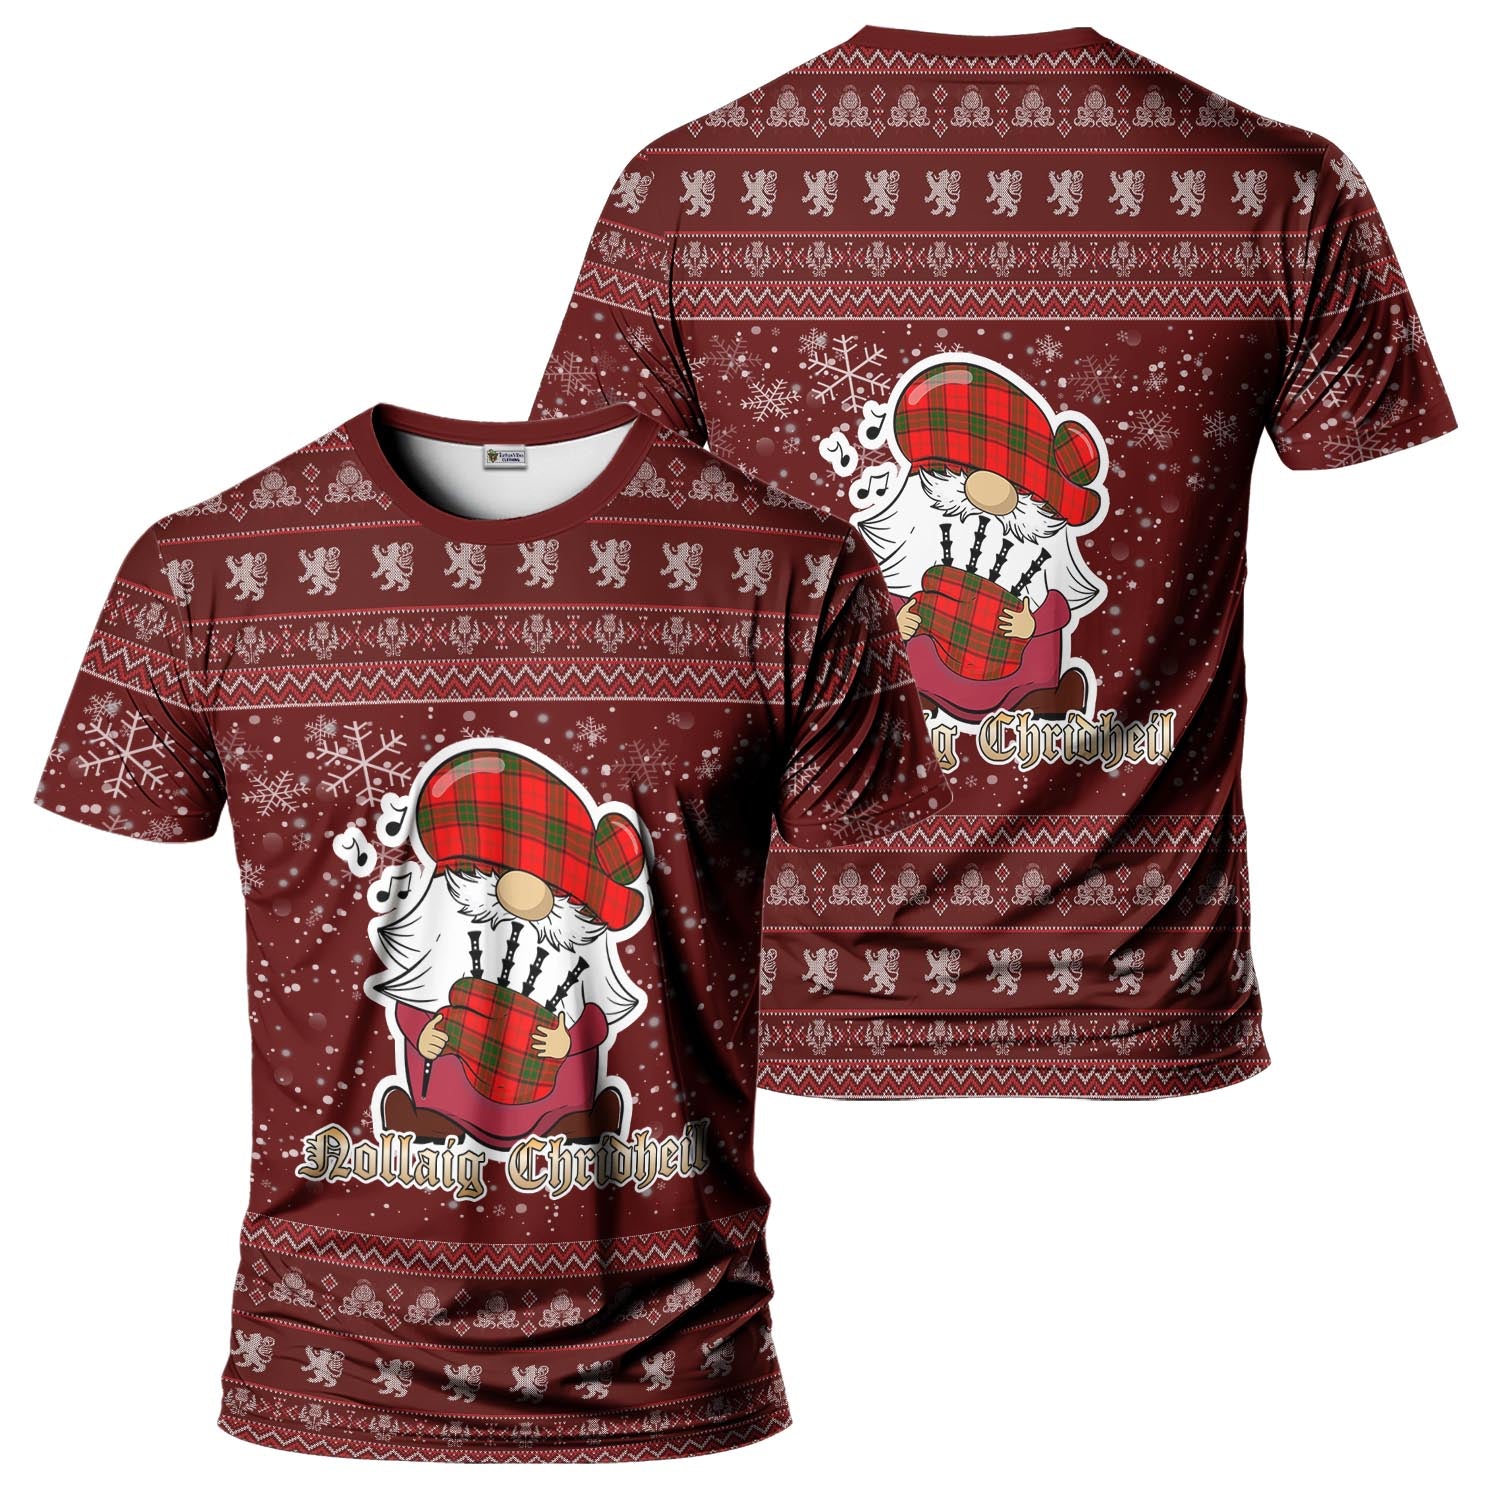 Maxtone Clan Christmas Family T-Shirt with Funny Gnome Playing Bagpipes - Tartanvibesclothing